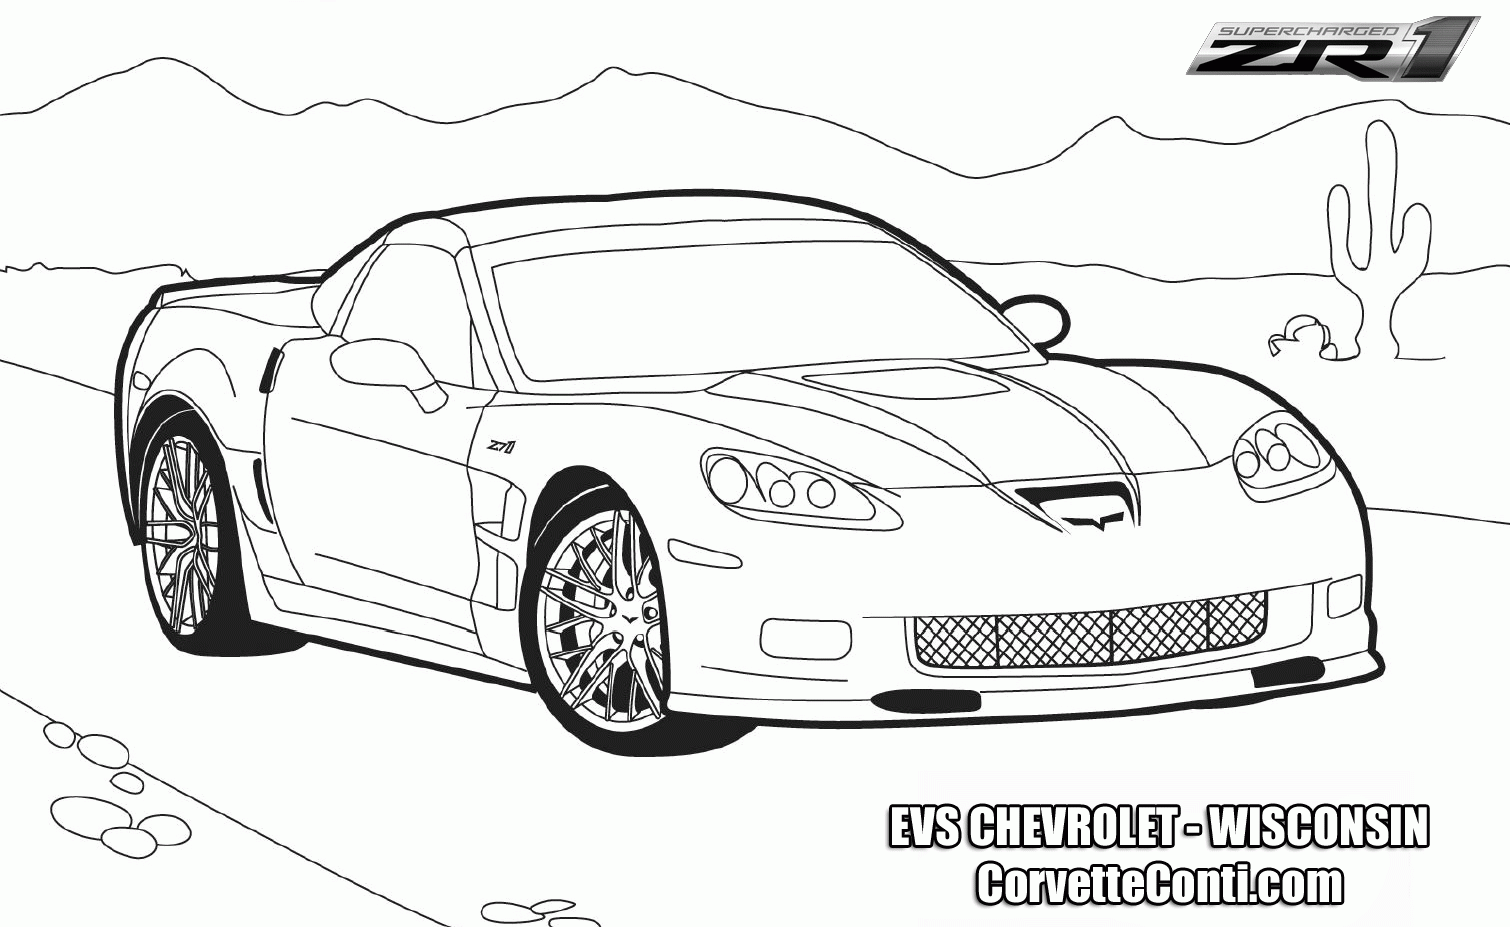 Corvette Coloring Page Coloring Home Simply do online coloring for chevrolet corvette cars 1970 coloring pages directly from your gadget, support for ipad. corvette coloring page coloring home